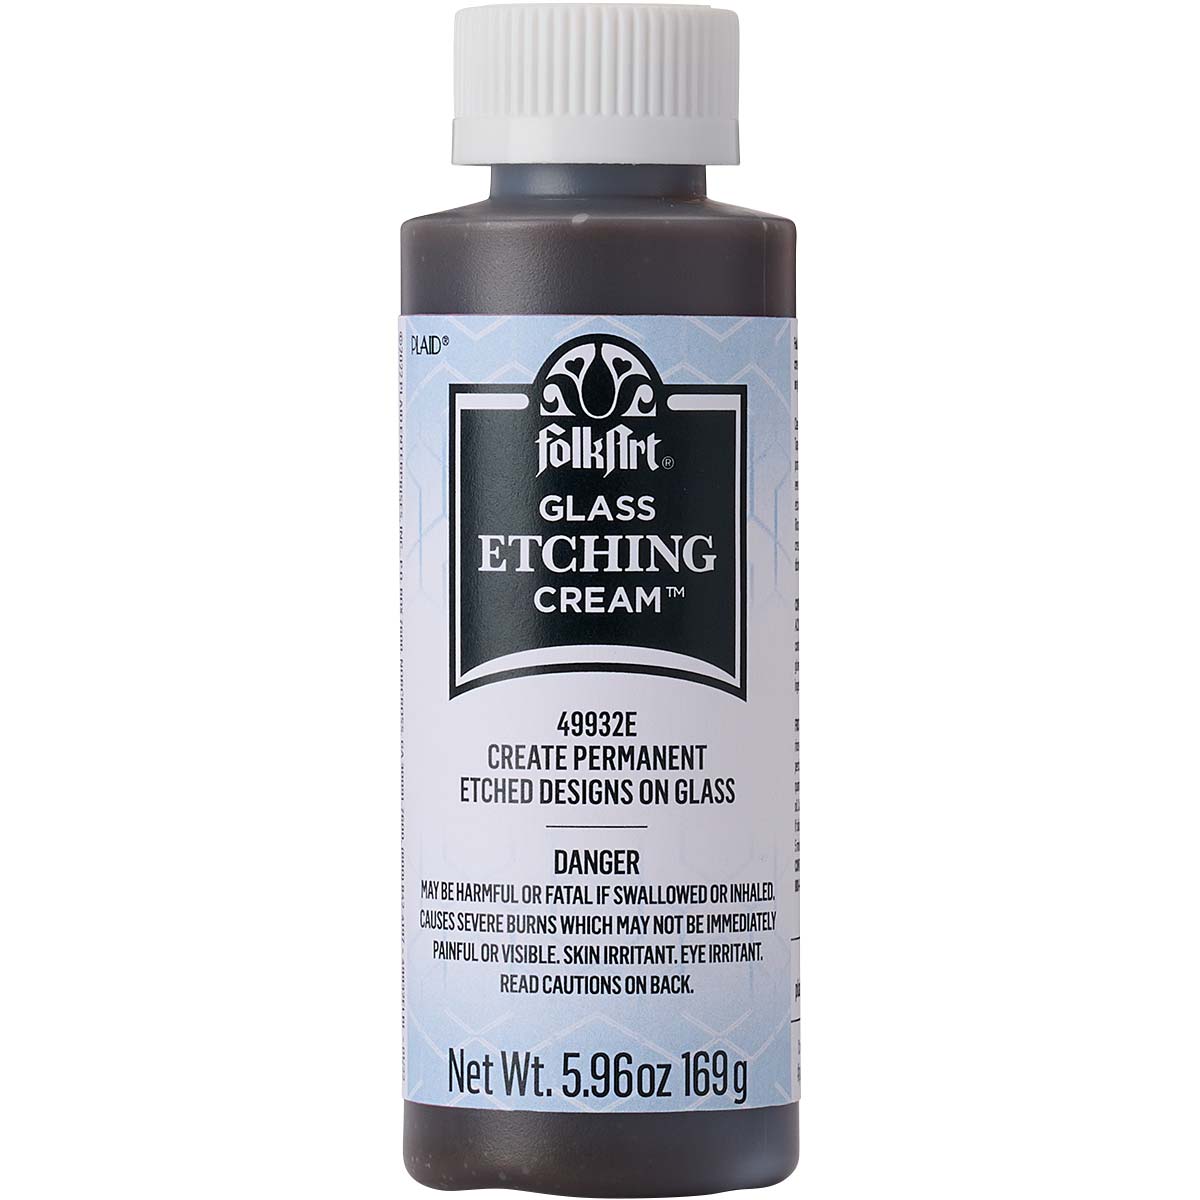 Everything You Need To Know About Etching Cream